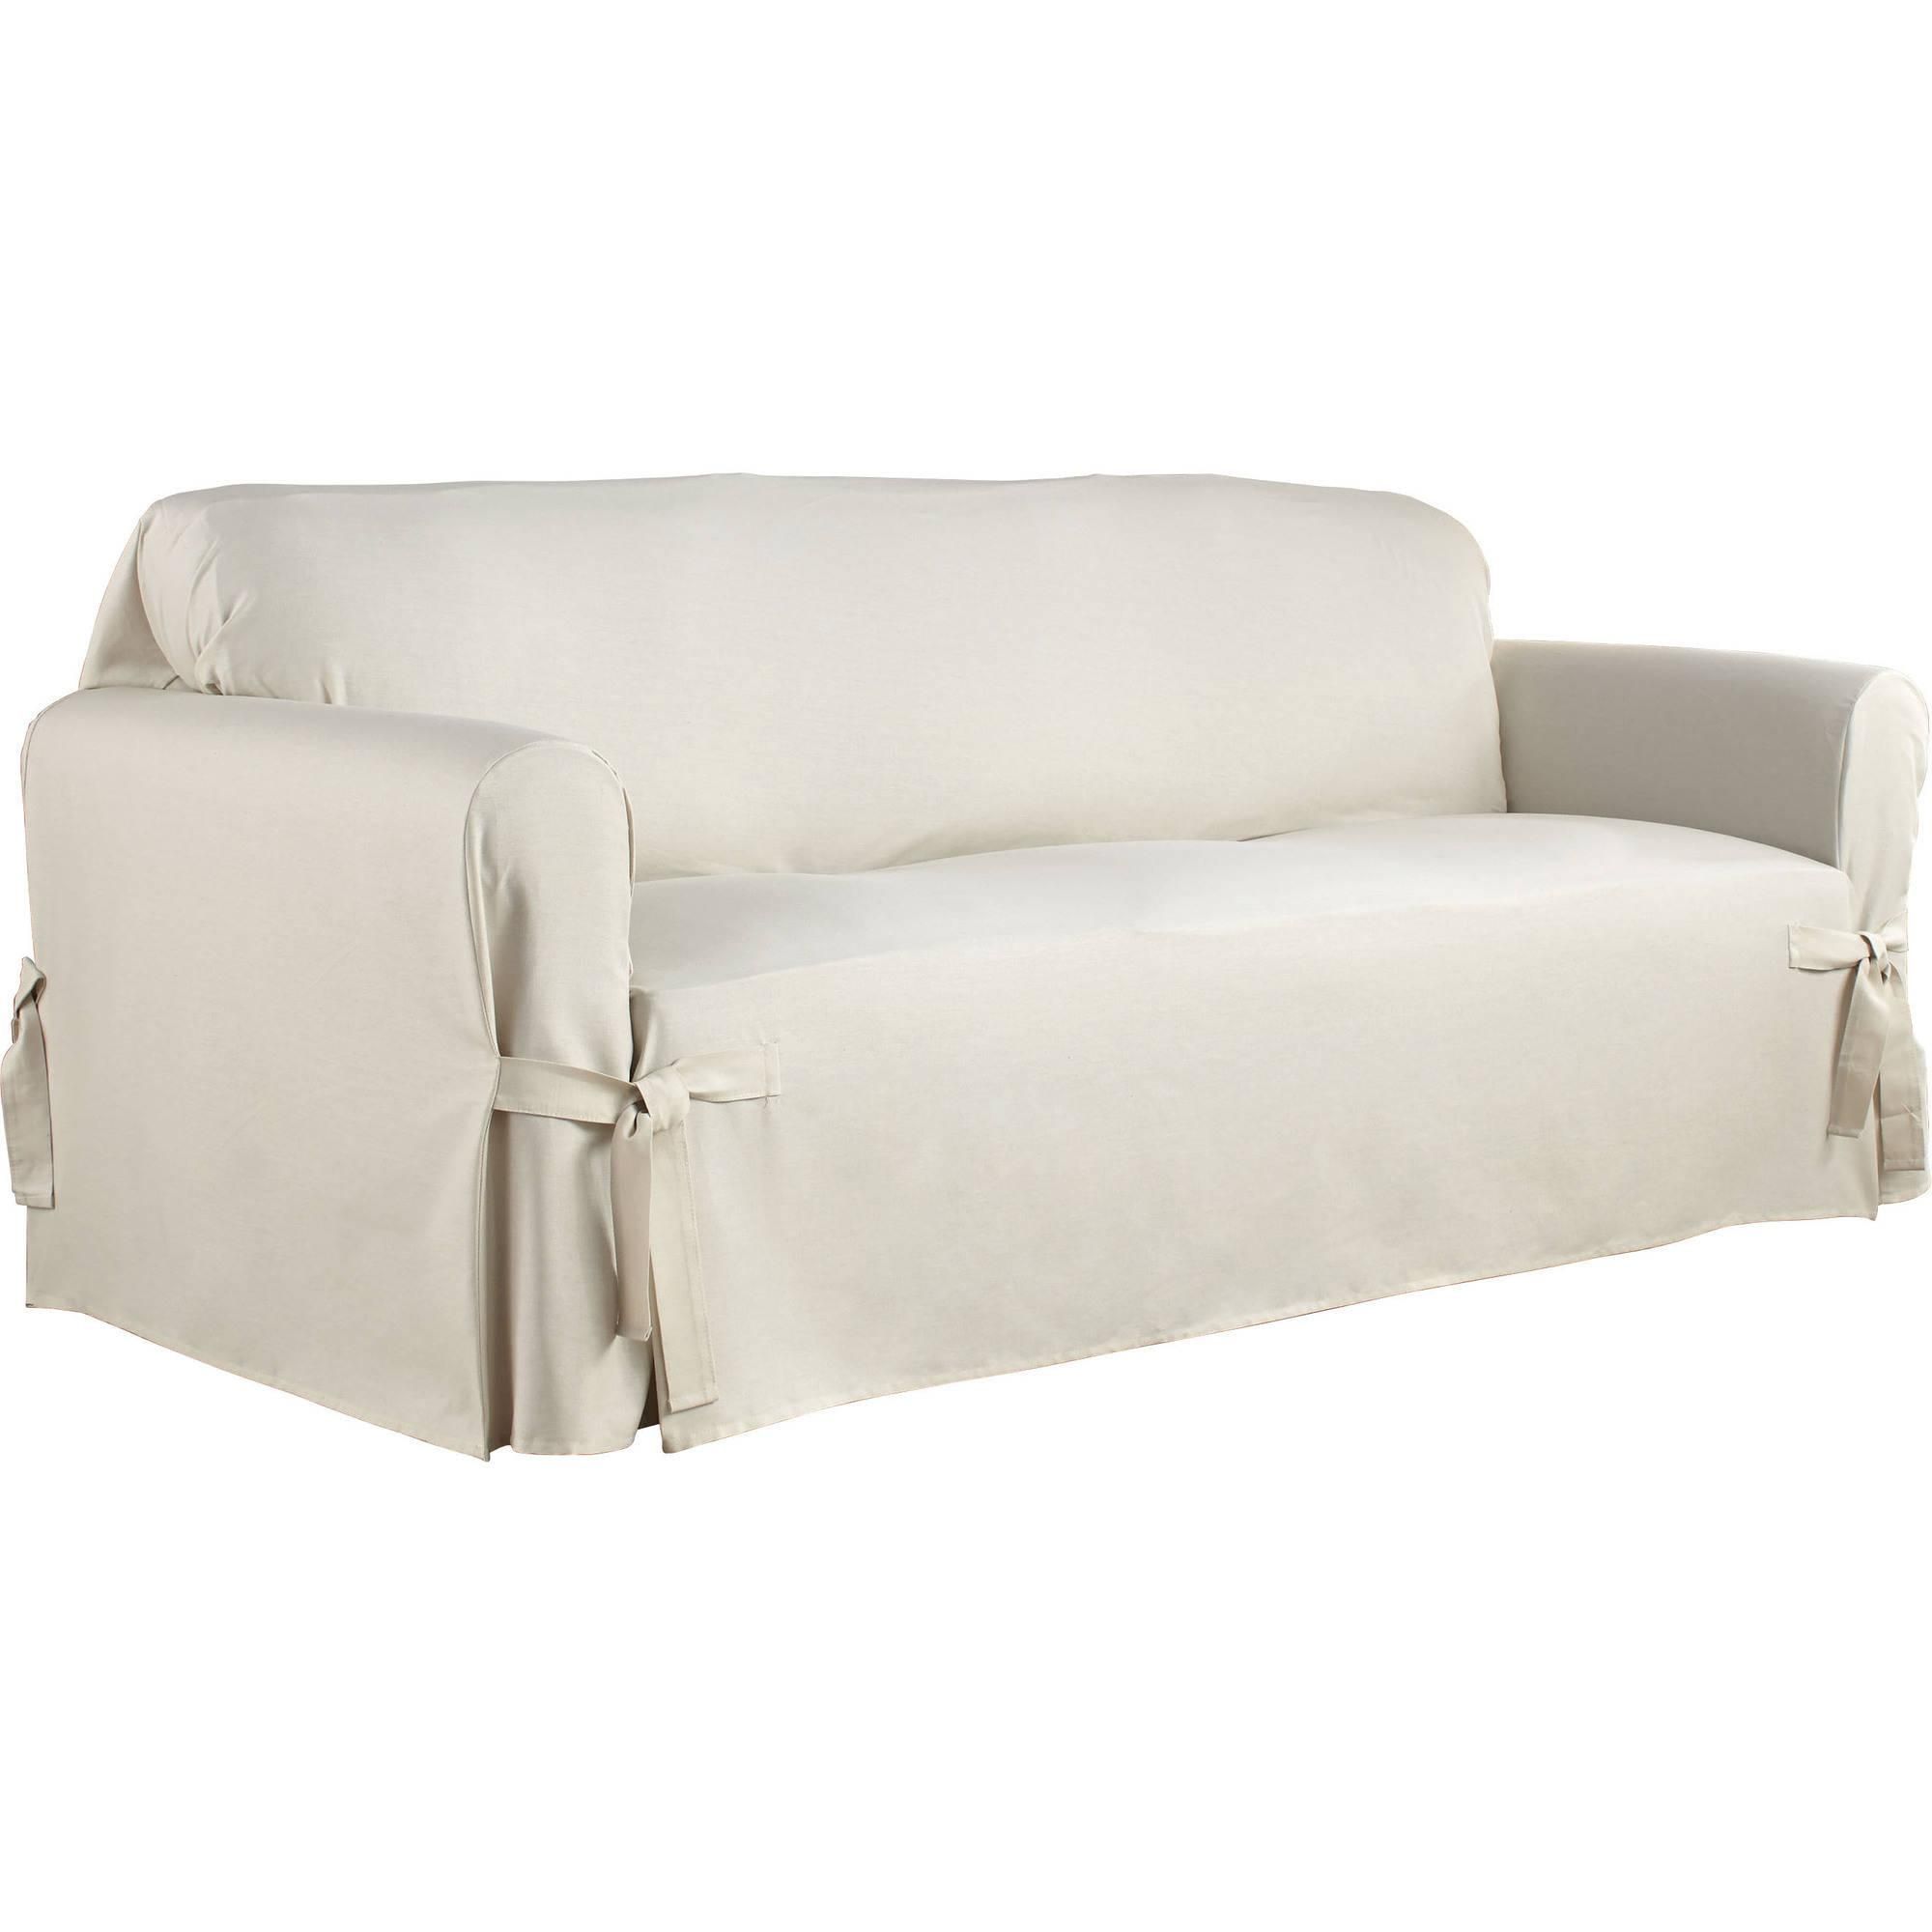 Queen Size Sleeper Sofa Slipcover | Tehranmix Decoration With Slipcovers For Sleeper Sofas (View 9 of 20)